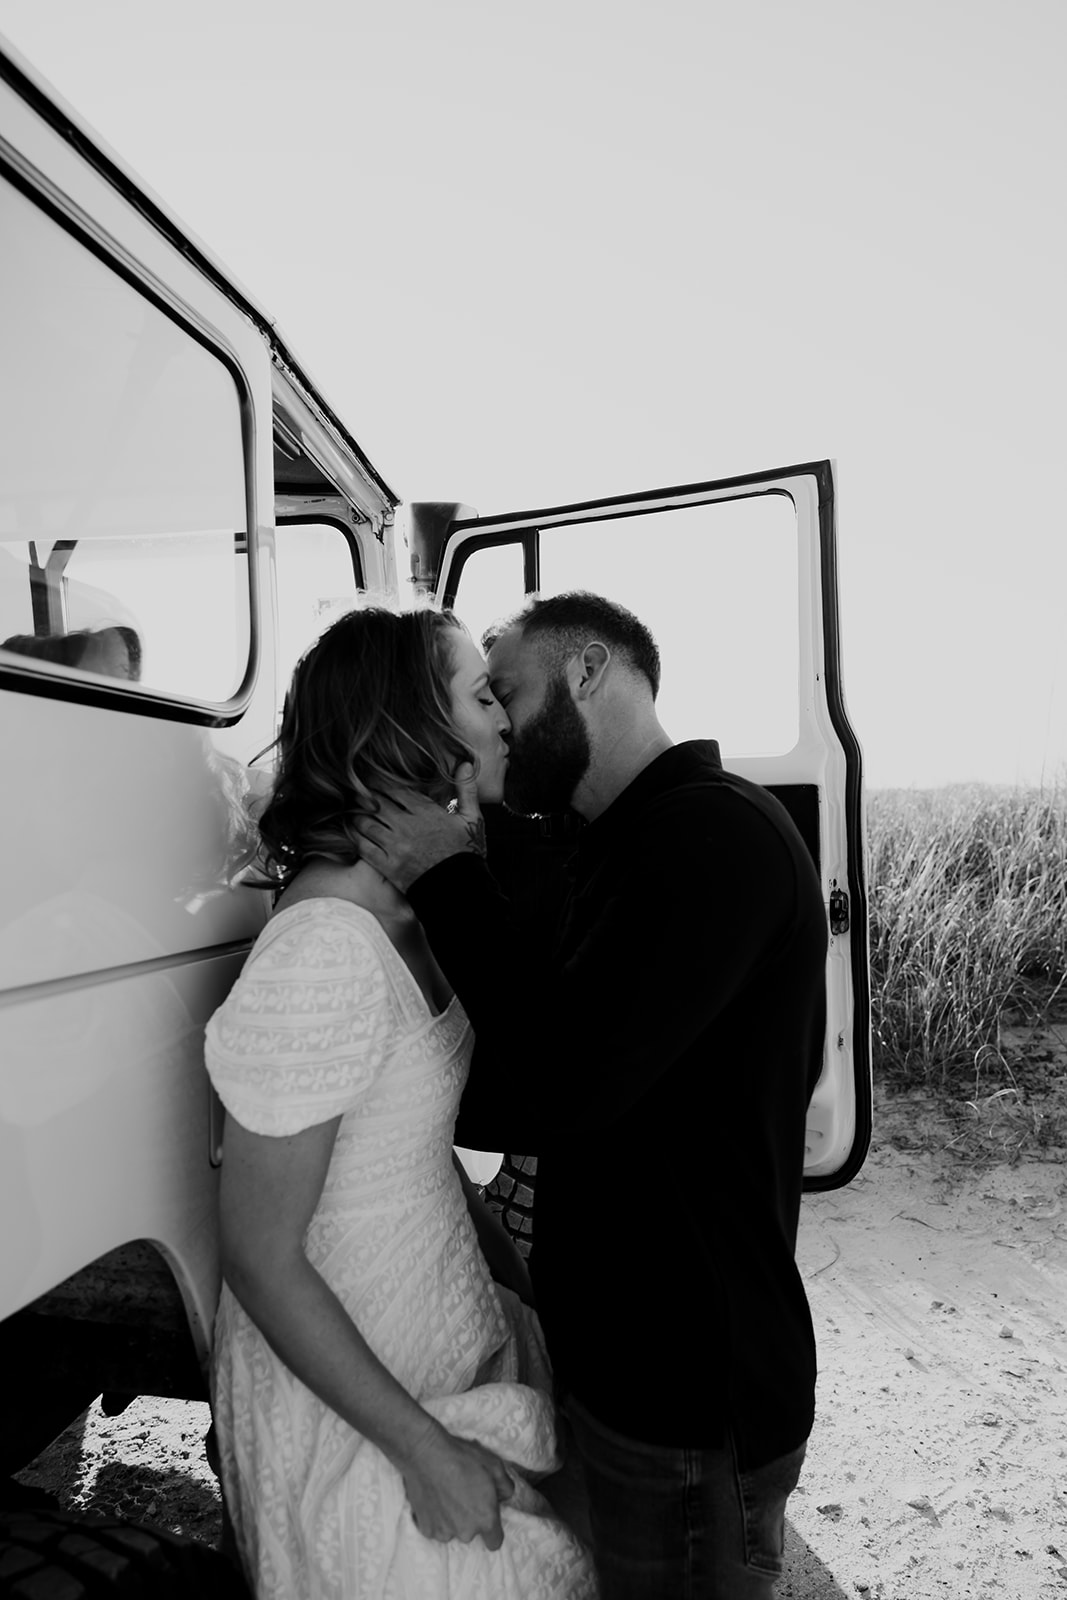 Man kisses woman leaning against car. Sand and dunes in the background